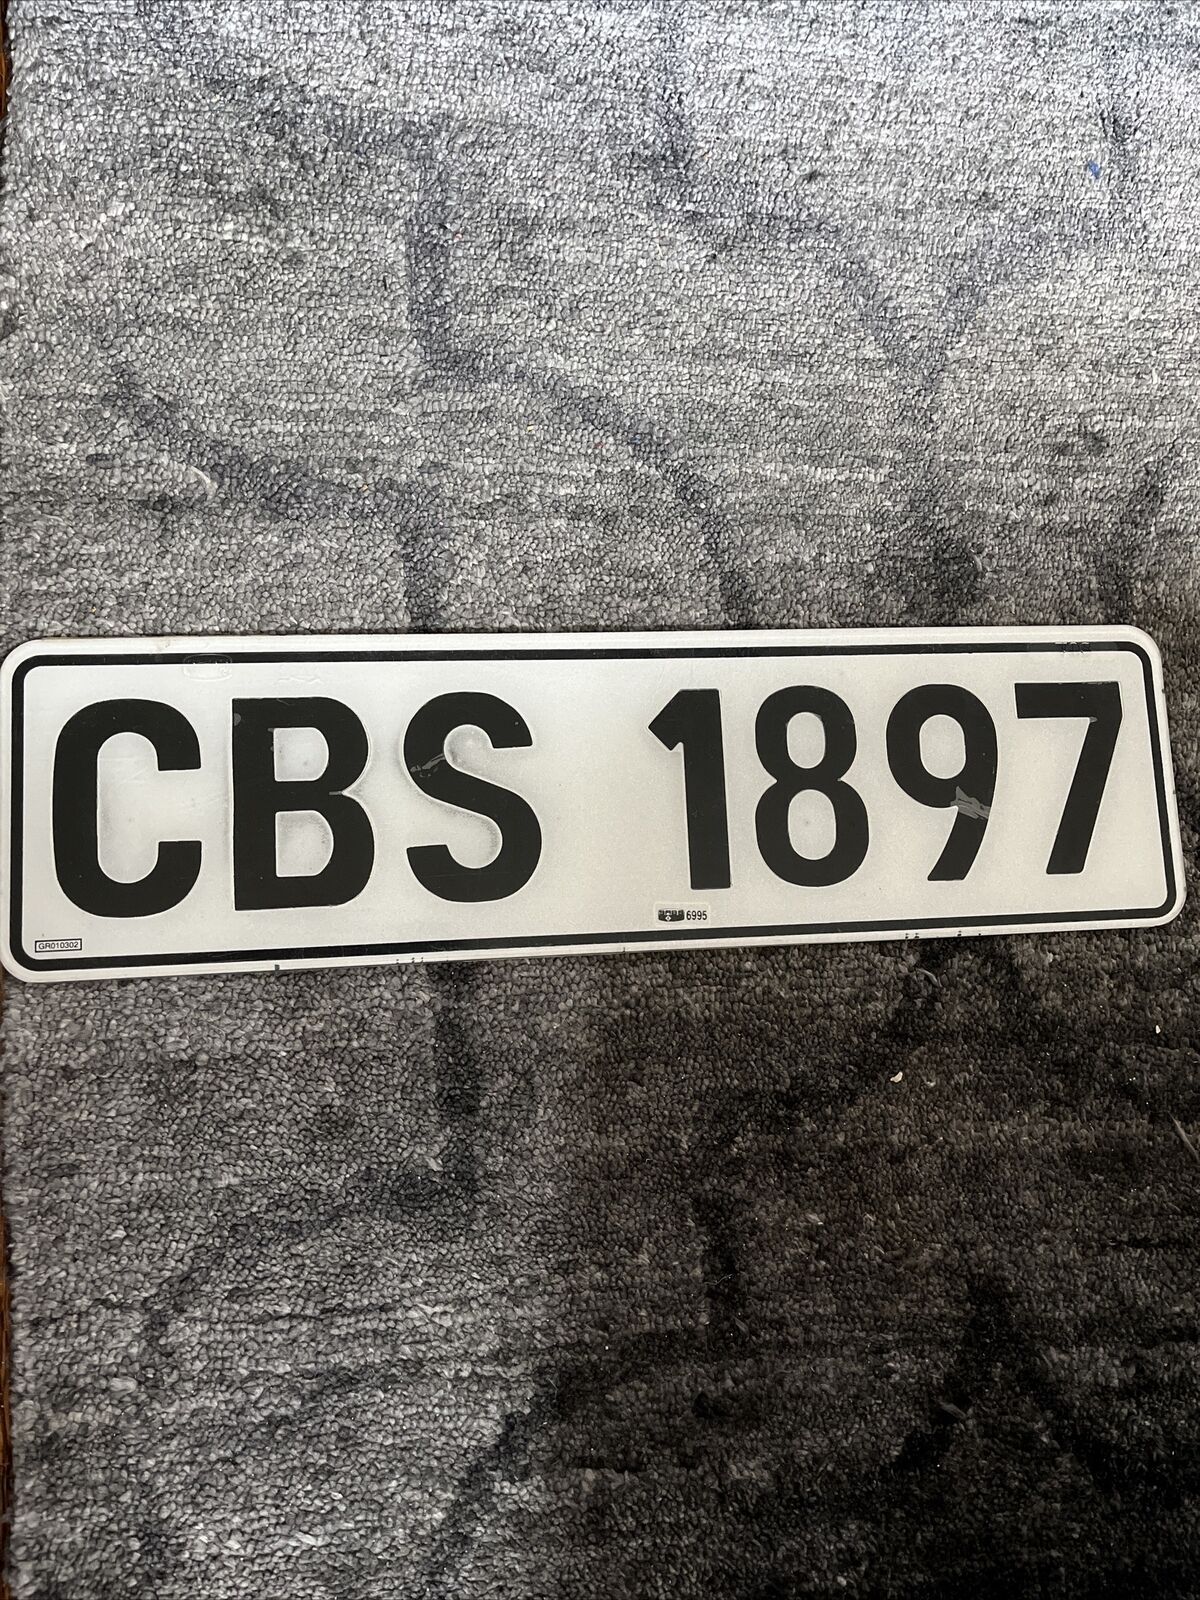 South Africa 🇿🇦 Mossel Bay & Hartenbos License Plate Tag # CBS 1897